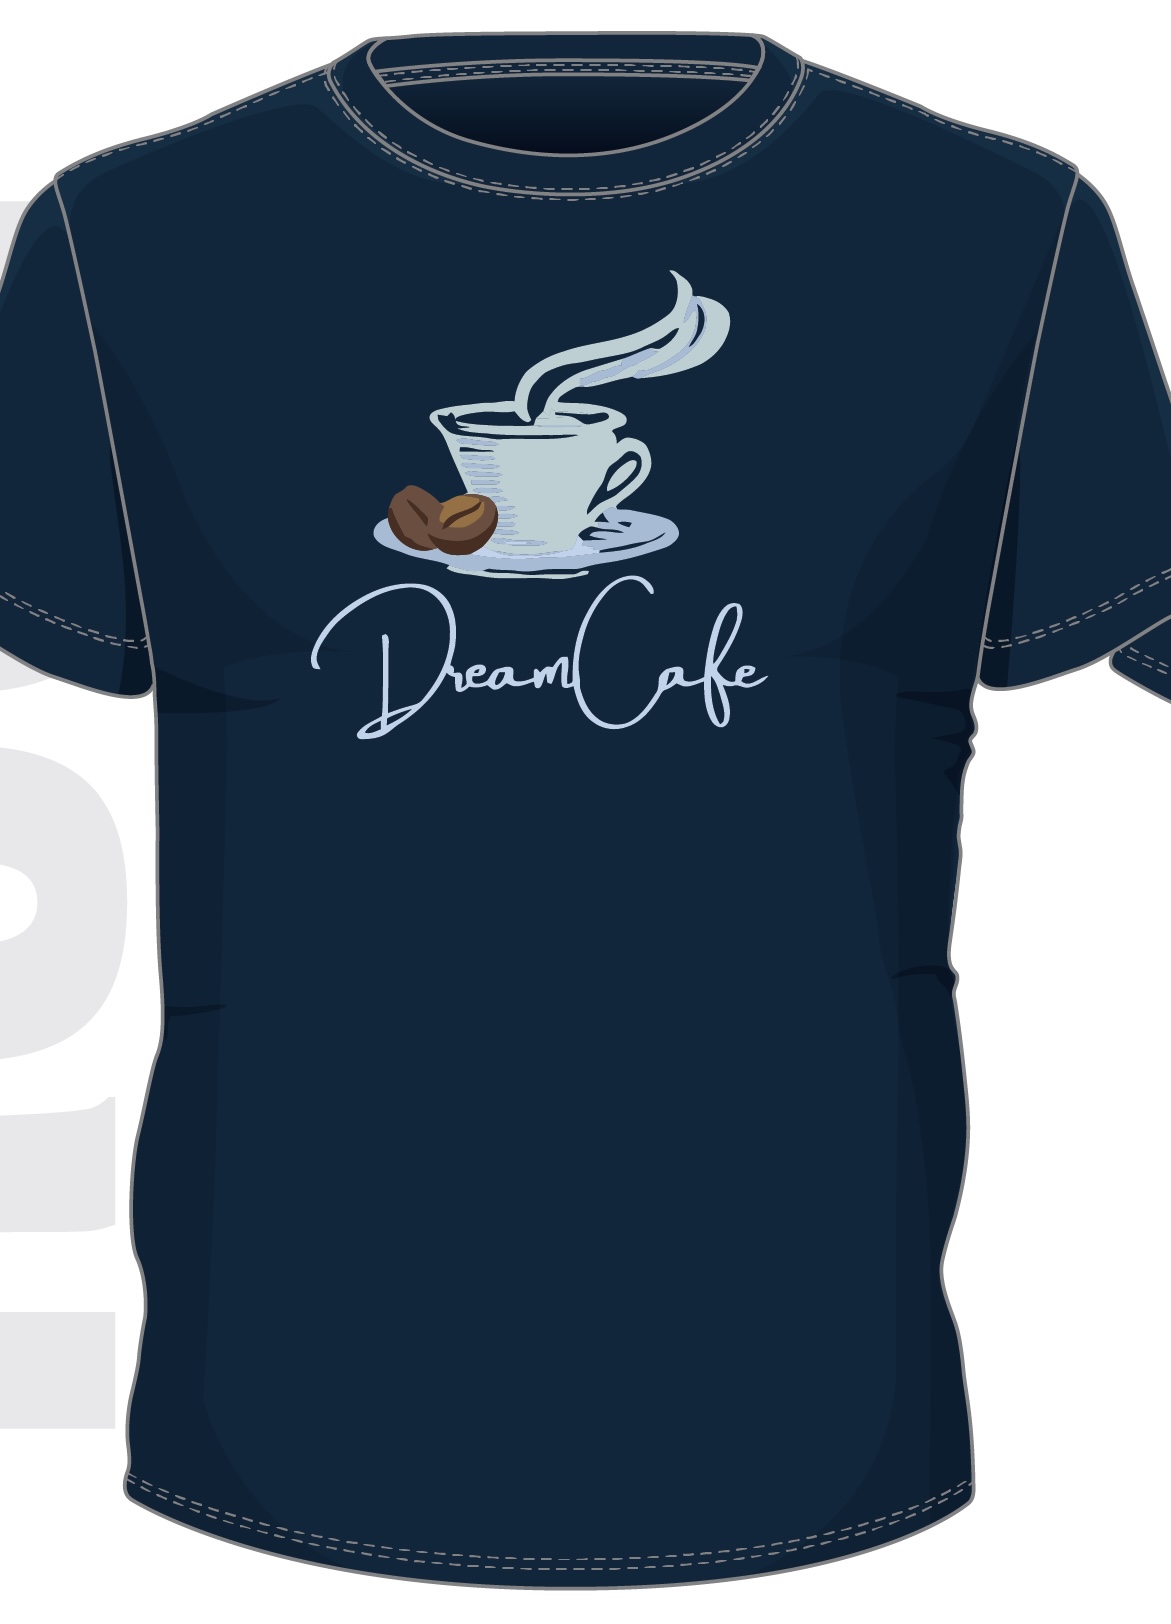 Dream Café tee shirts are also for sale